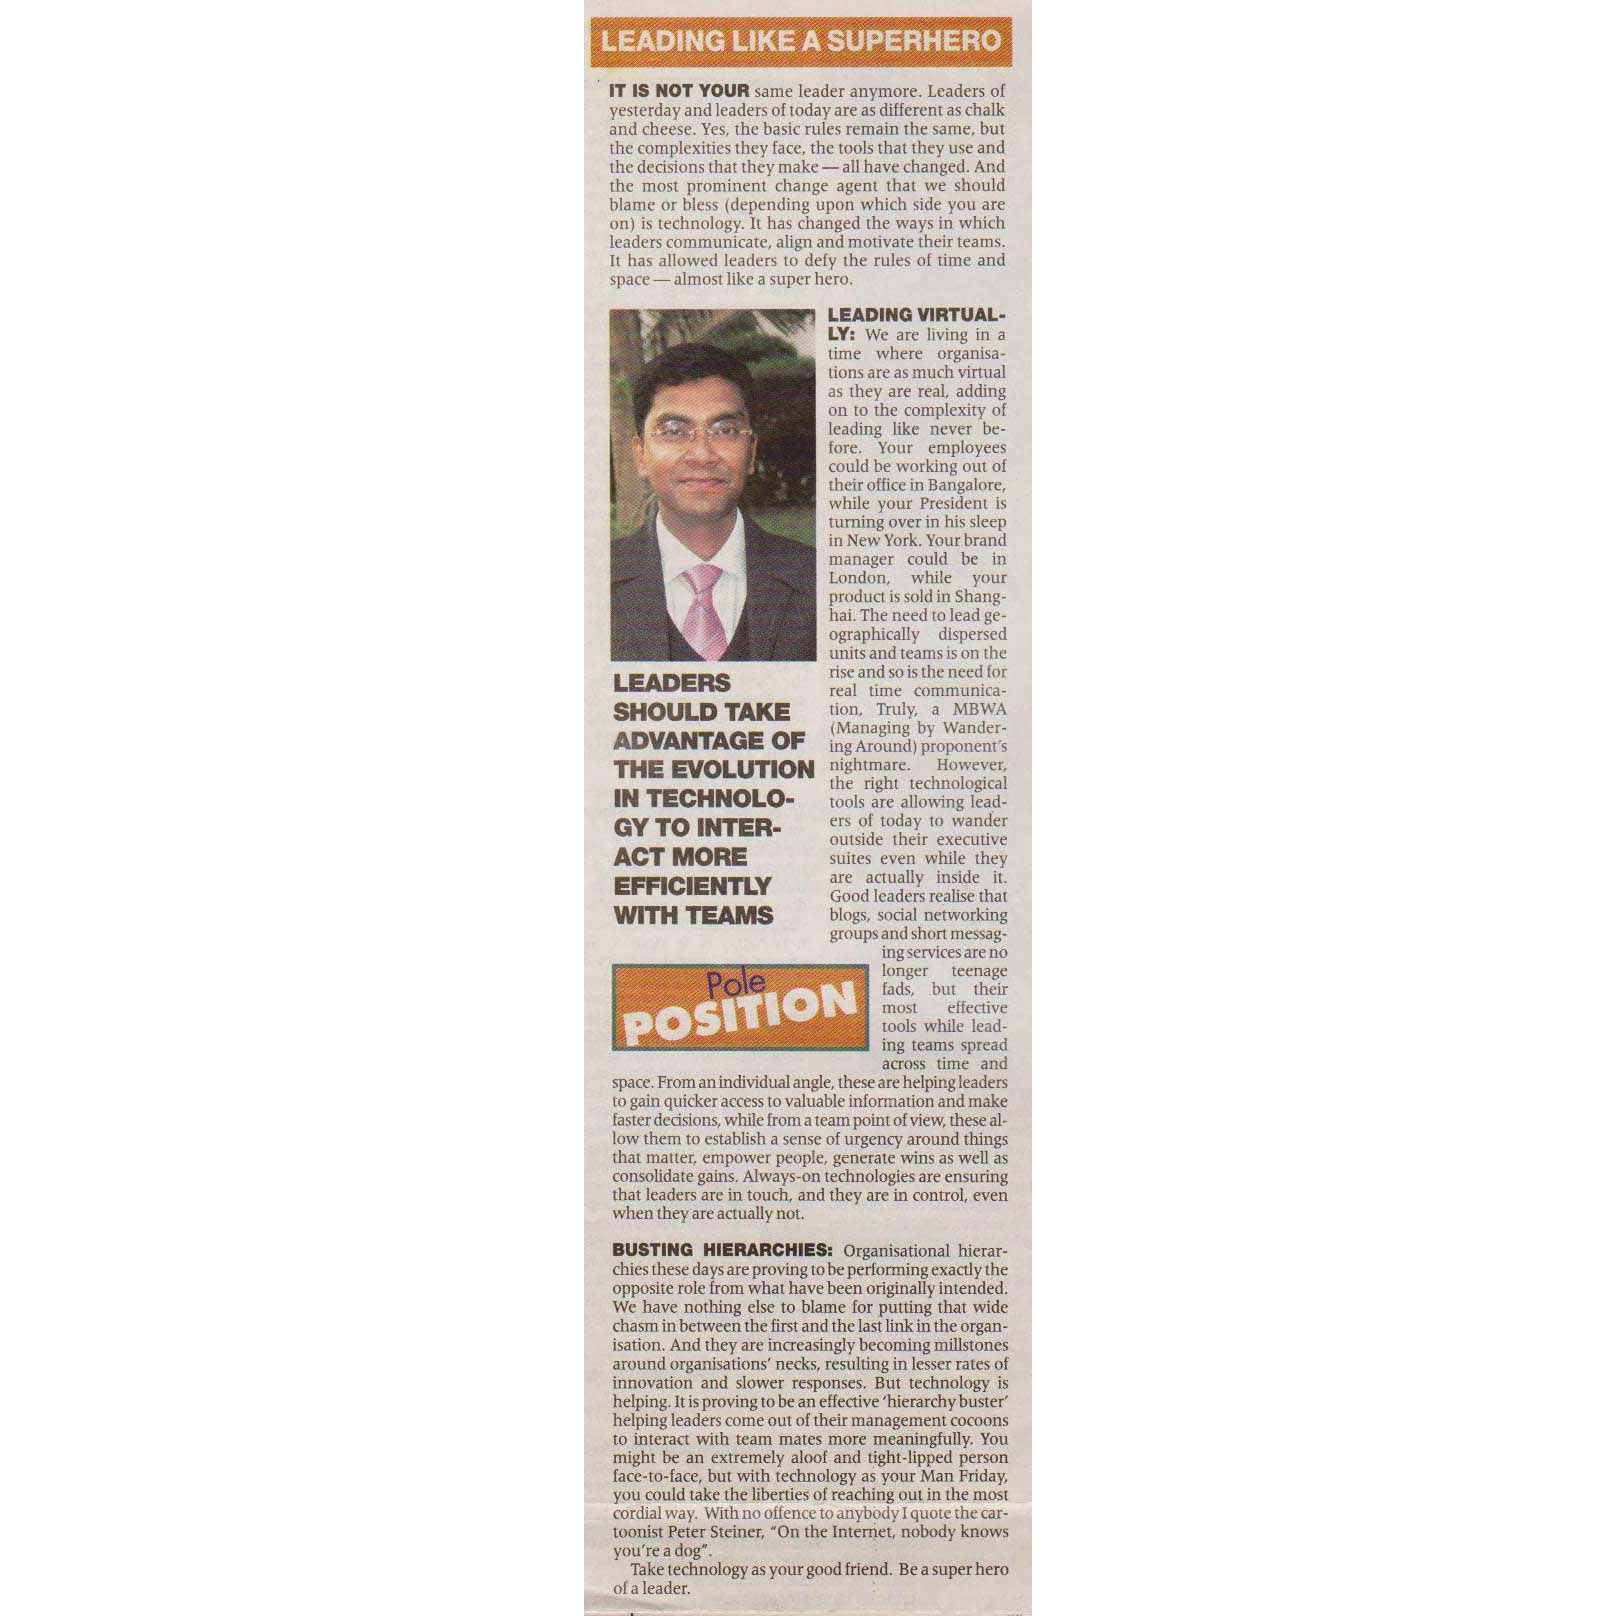 The Economic Times 18 July 2008